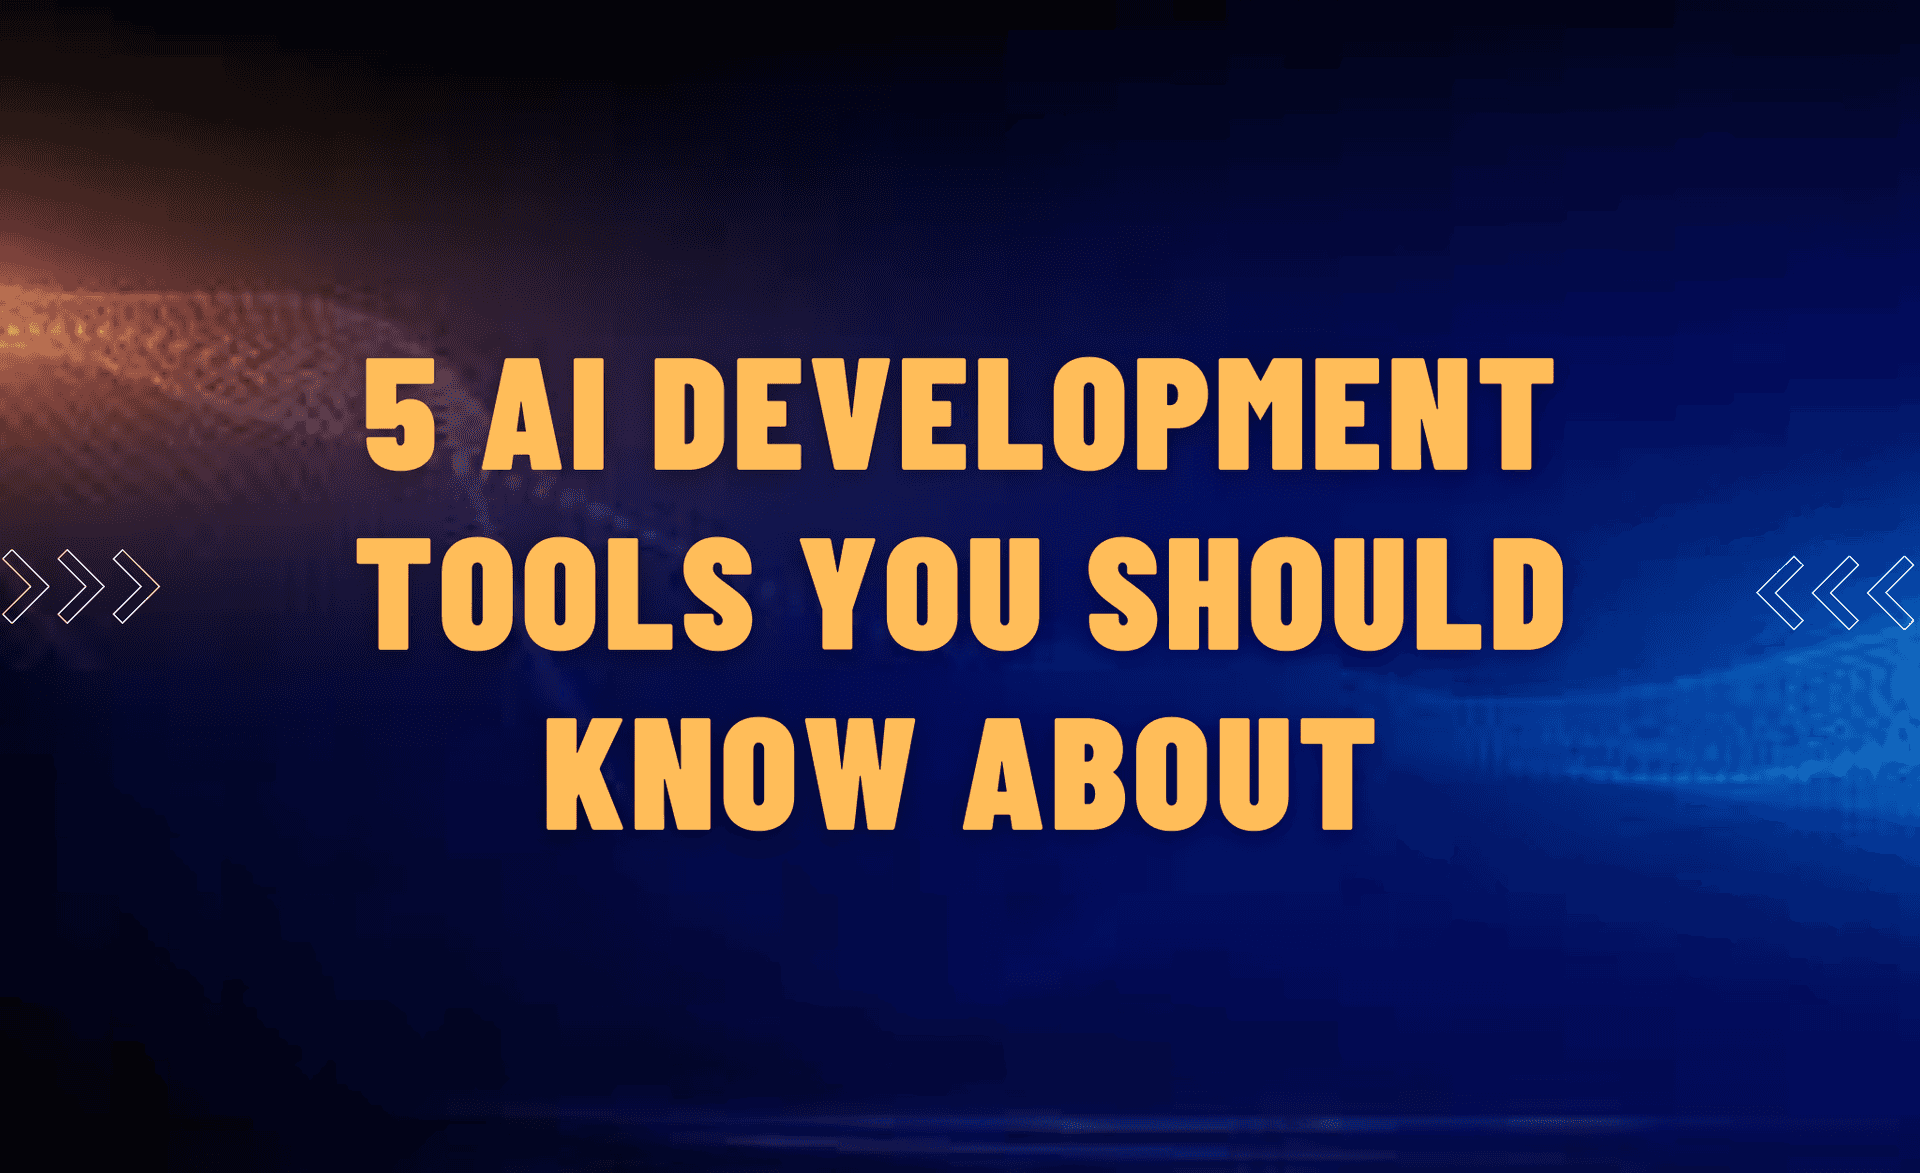 5 AI development tools you should know about